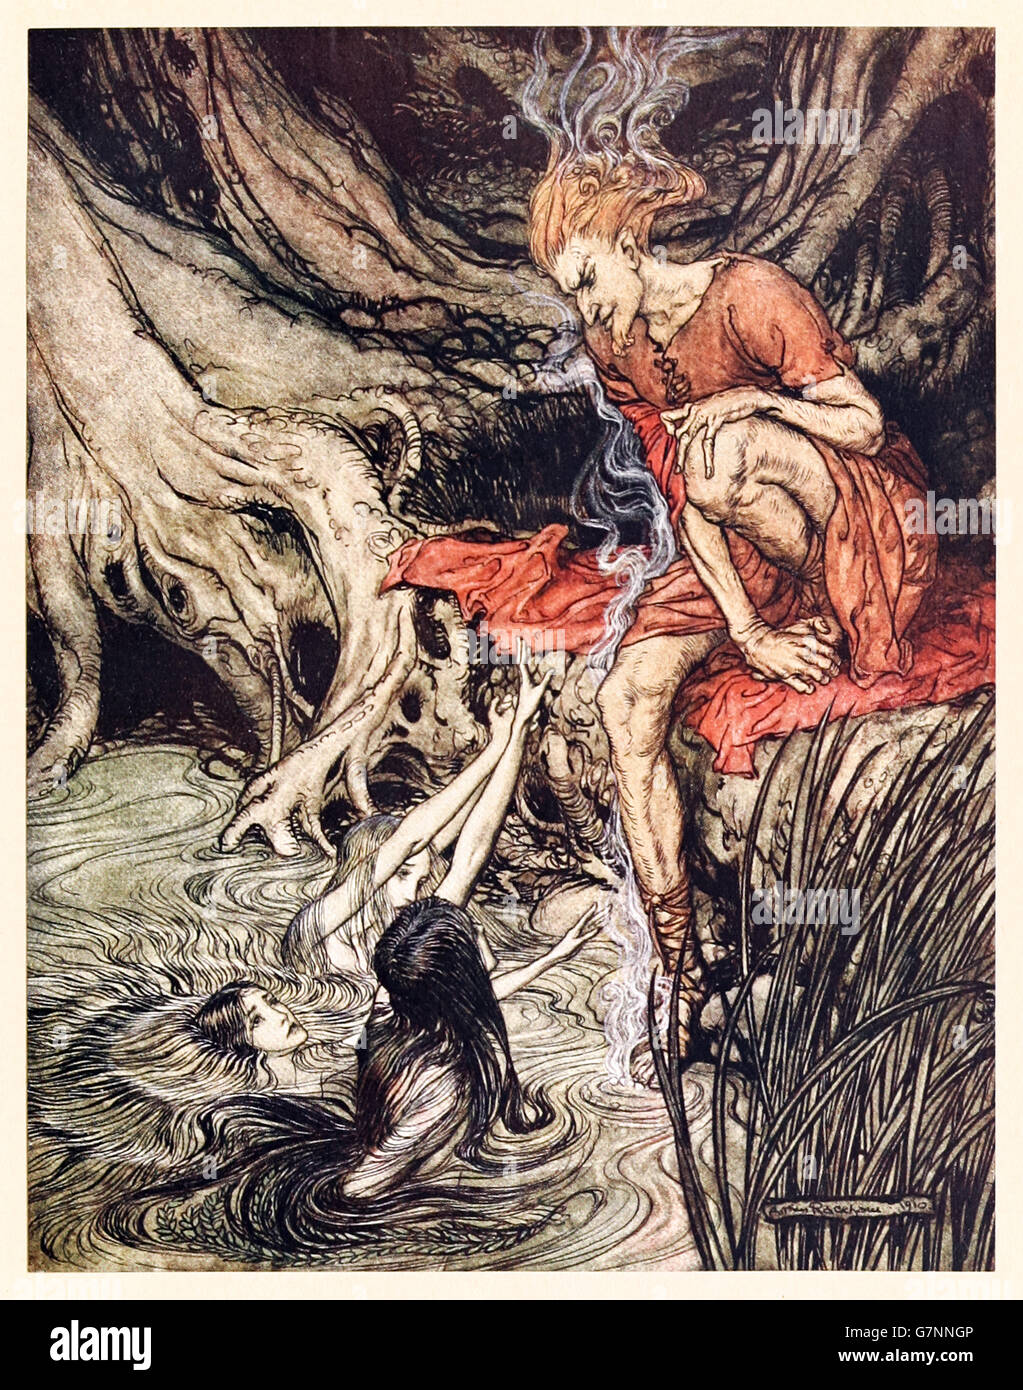 “The Rhine’s pure-gleaming children Told me of their sorrow” from ‘The Rhinegold & the Valkyrie’ illustrated by Arthur Rackham (1867-1939), published in 1910. Loge learns that Alberich has stolen the Rhinegold. Stock Photo